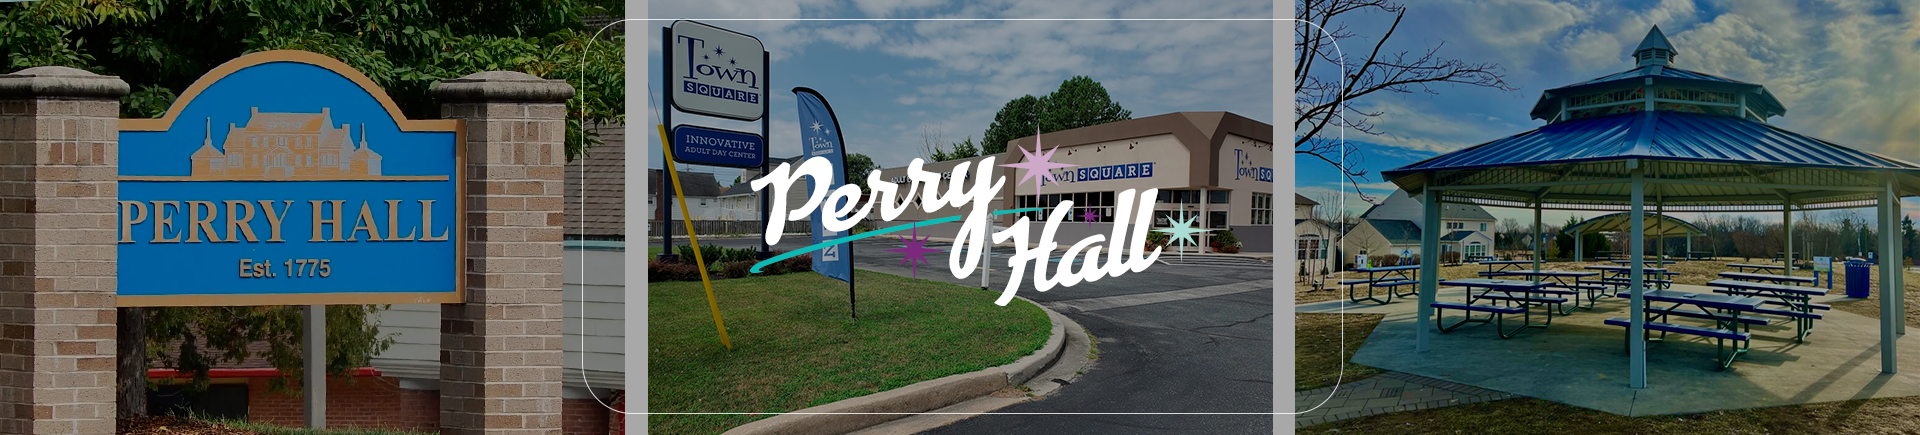 Perry Hall Contact Us